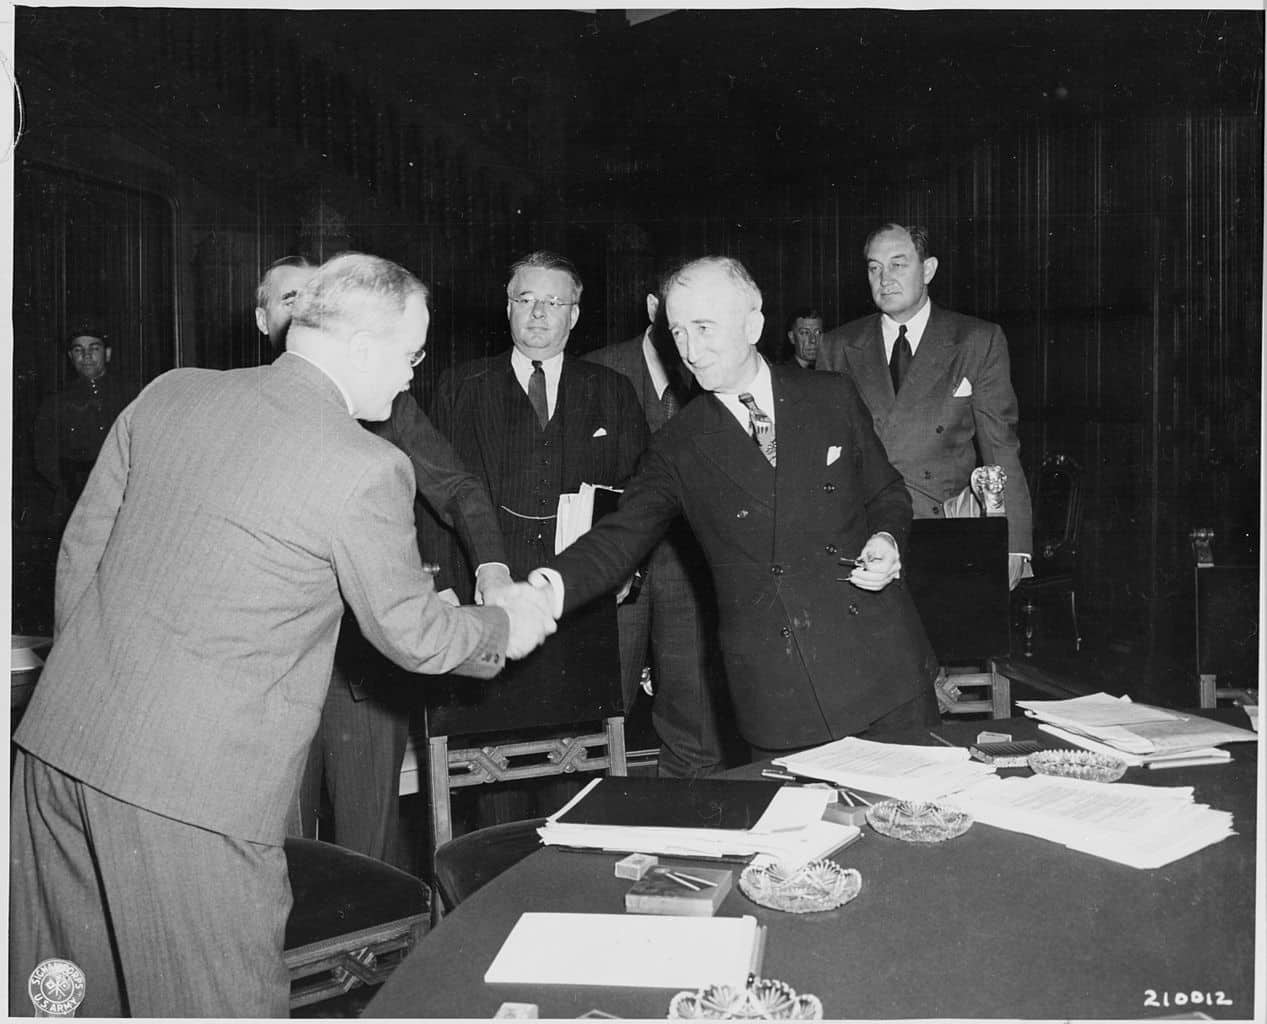 The Potsdam Conference - July 27th 1945 - Soviet foreign minister Vyacheslav Molotov, left, shakes hands with Secretary of State James Byrnes before the commencement of a session of the Potsdam Conference